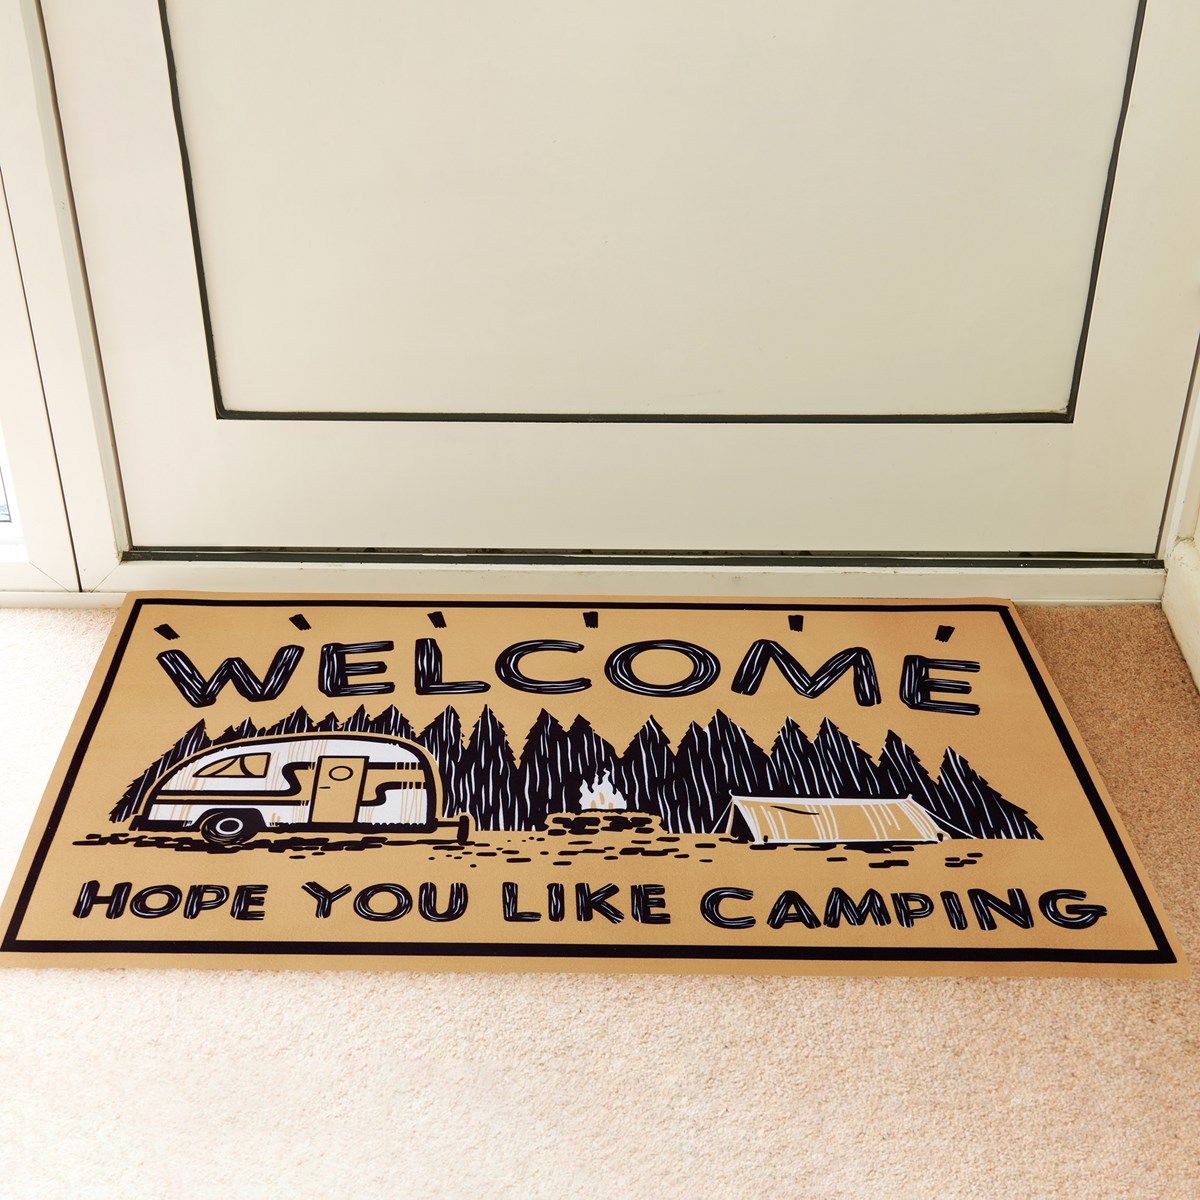 Hope You Like Camping Rug - Polyester, PVC Skid-resistant backing